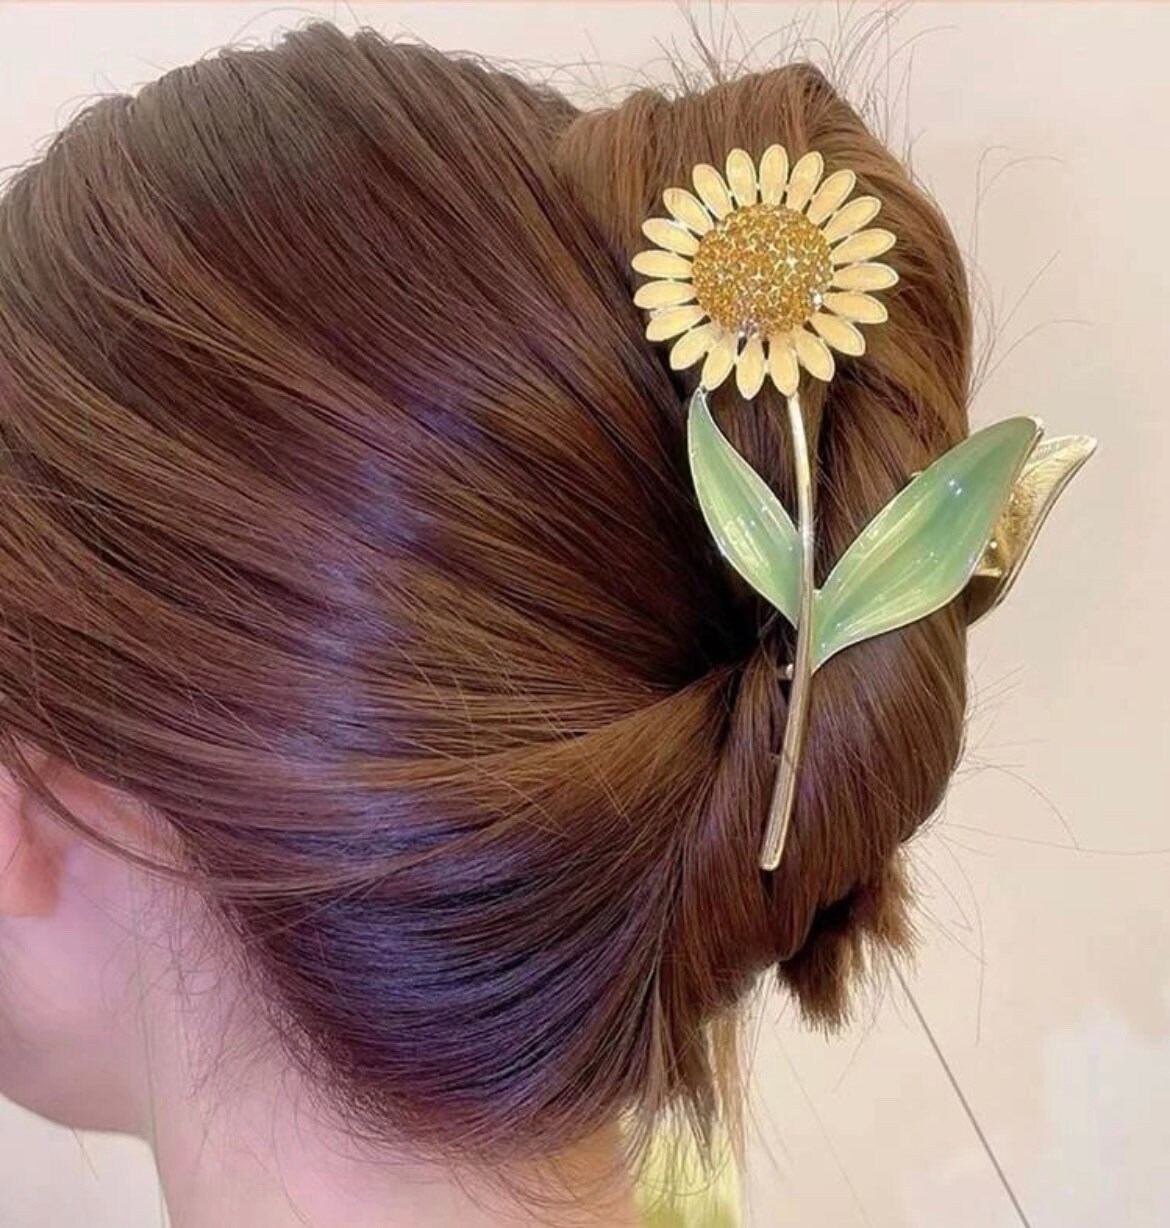 Flower Hairstyle Accessory - Etsy